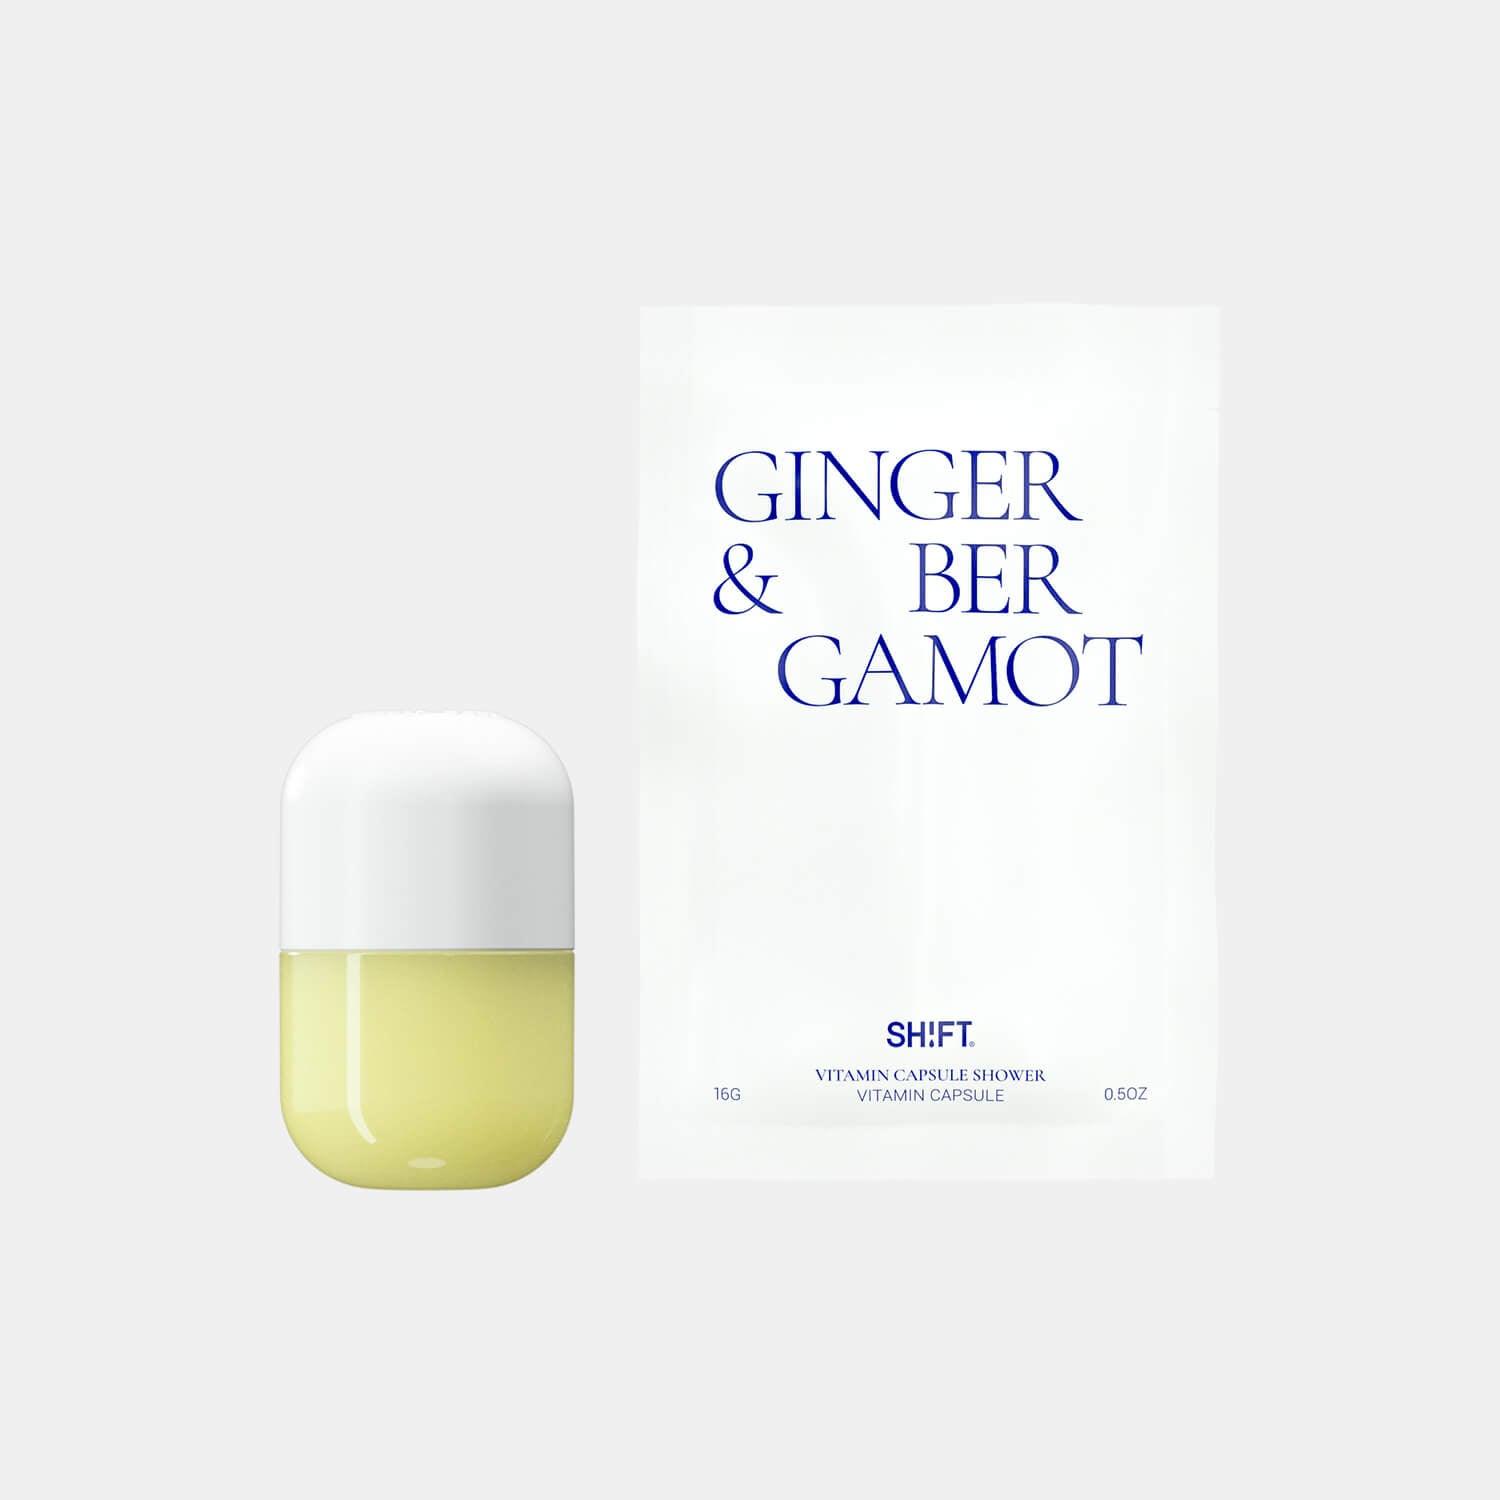 ginger & bergamot - aromatherapy diffuser showerhead scent capsule with shower filter 